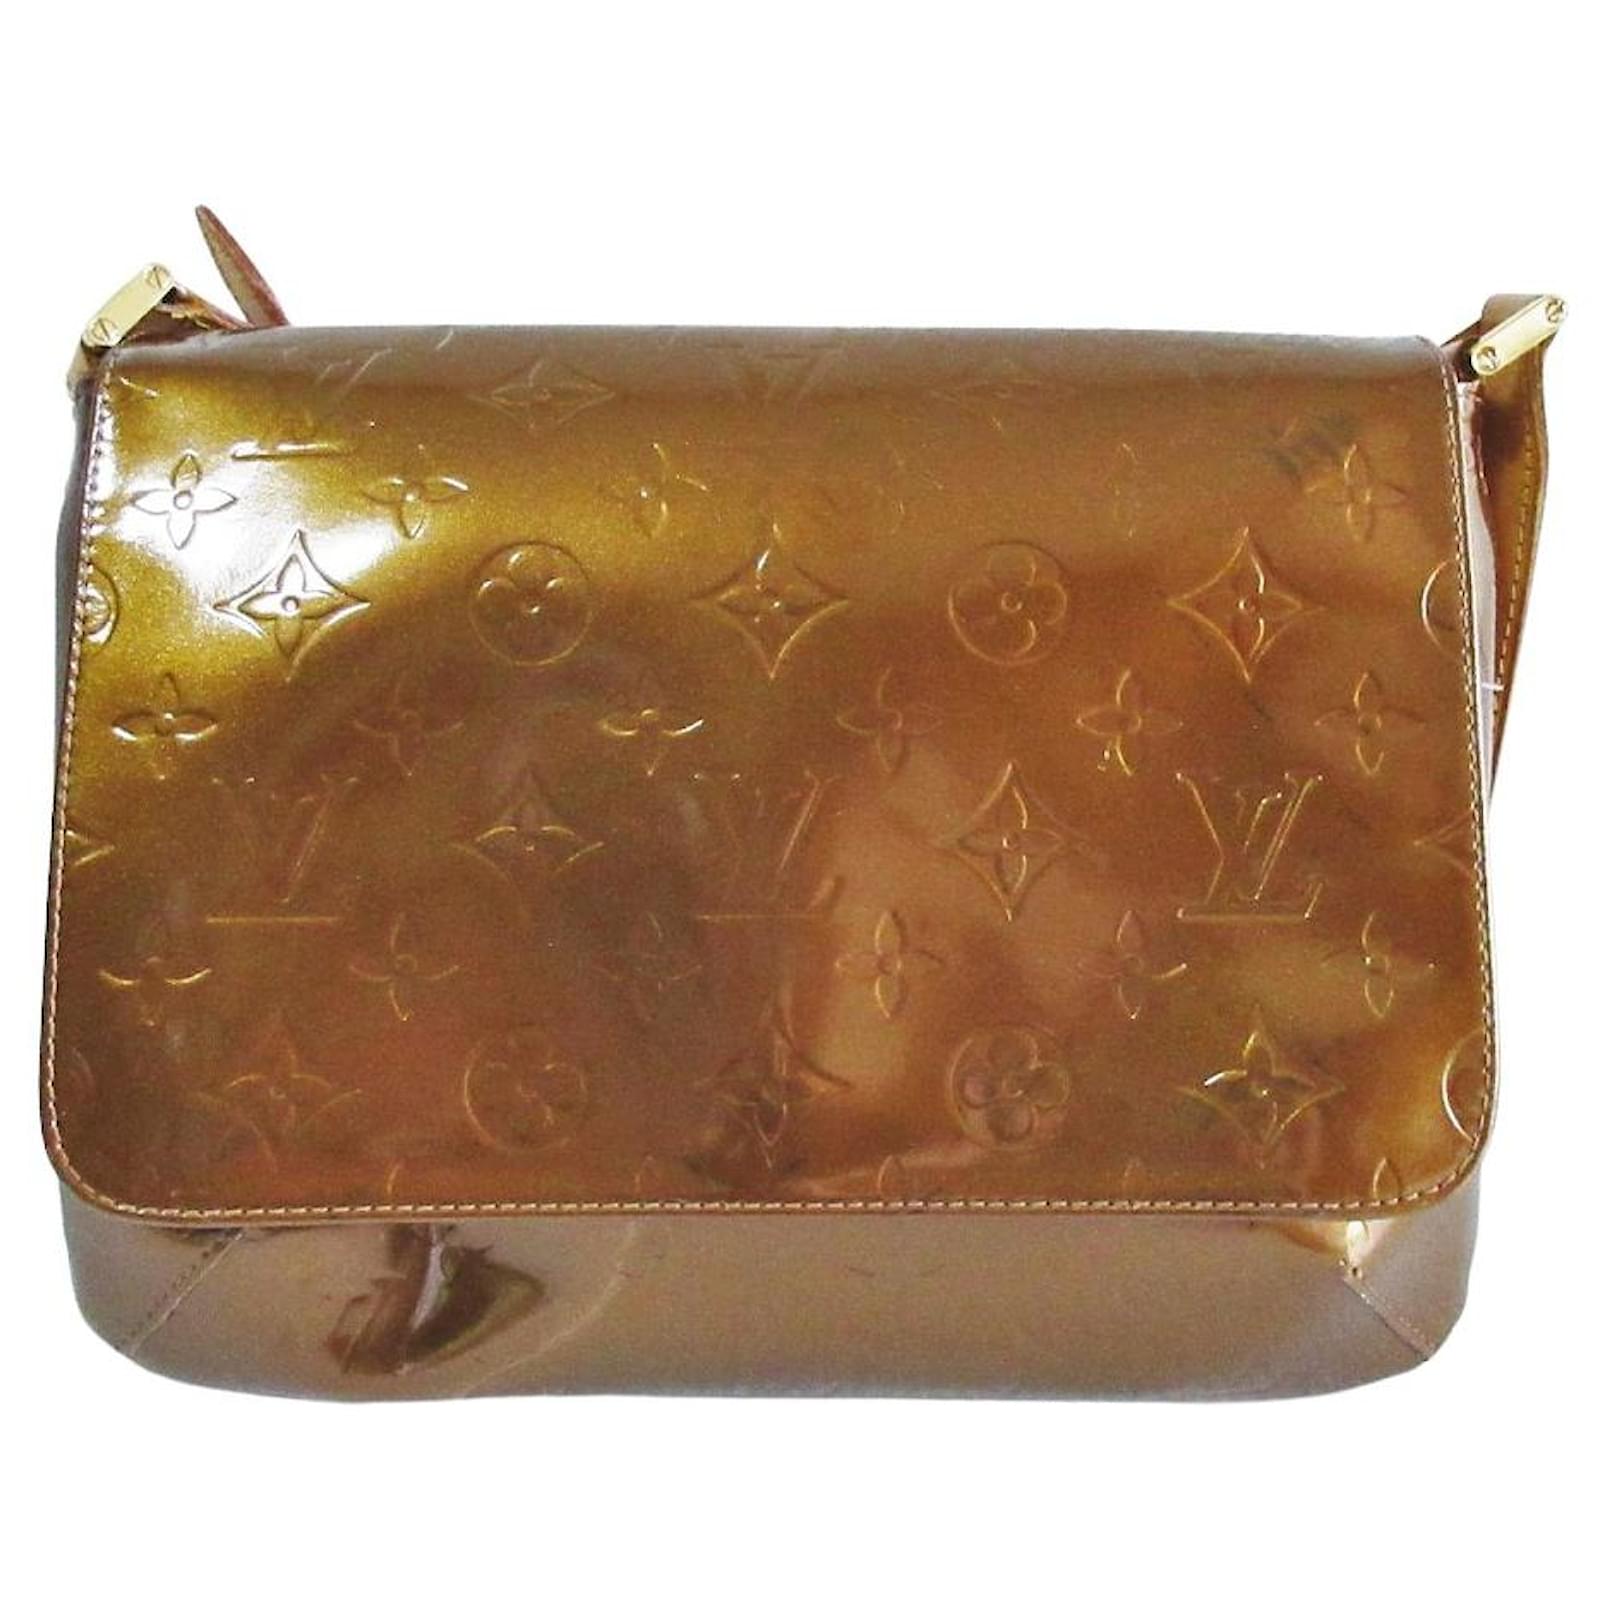 Thompson patent leather handbag Louis Vuitton Gold in Patent